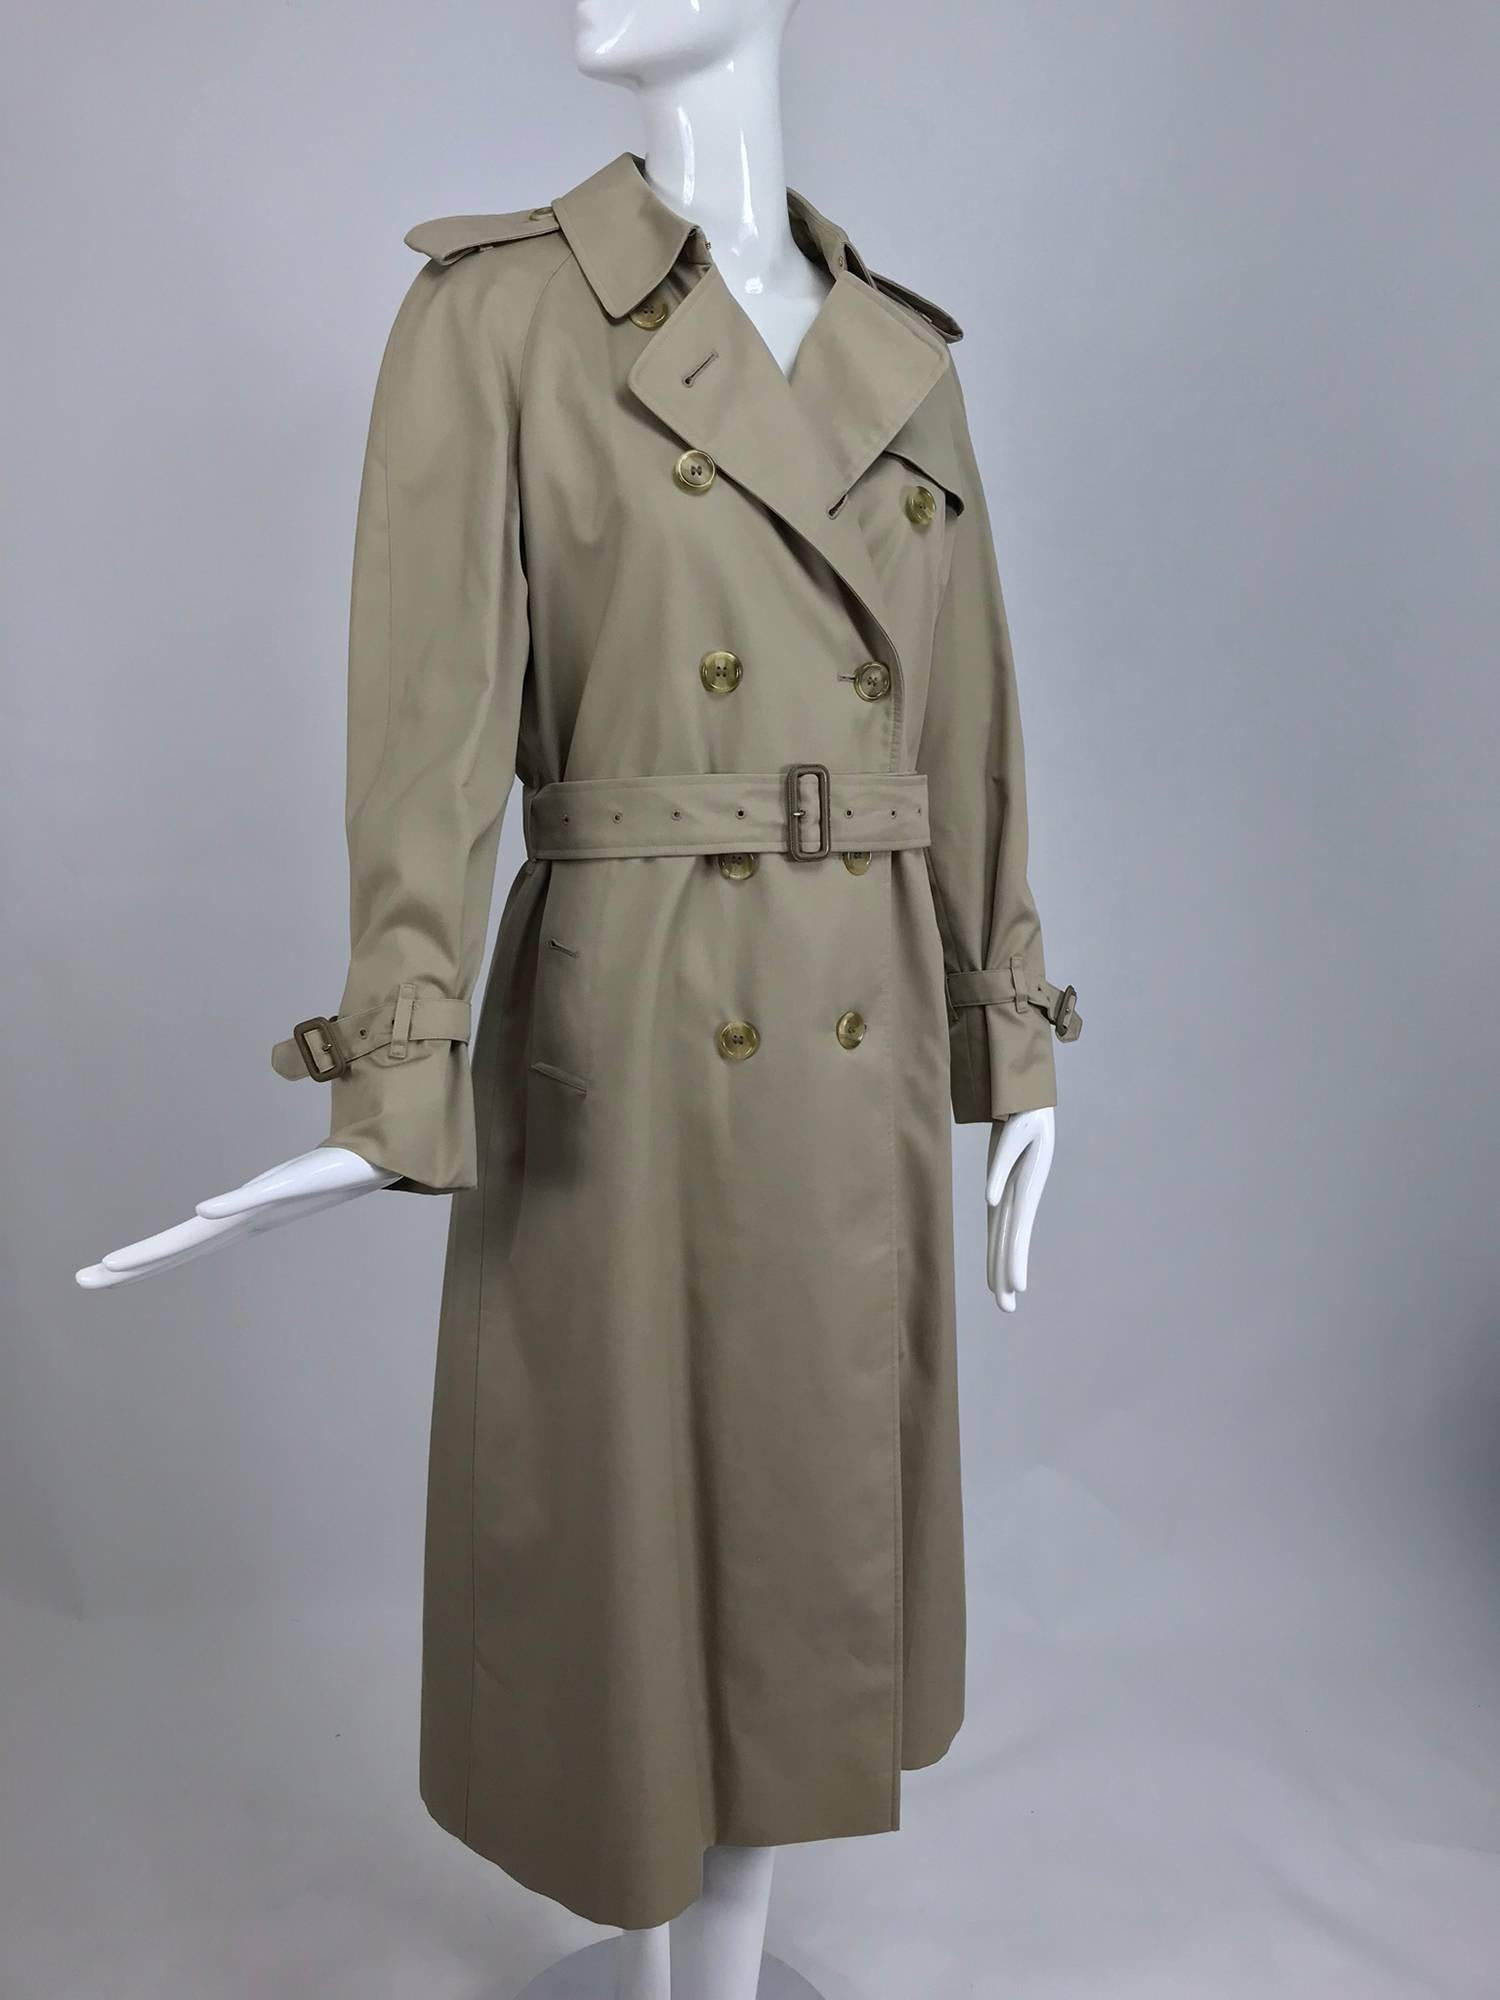 Burberrys classic tan poplin trench coat with zip out removable nova check wool lining...All the classic trench coat details are here, epaulets, storm flap, self belt, pocket flaps, raglan sleeves sleeve buckle bands, deep back vent with button